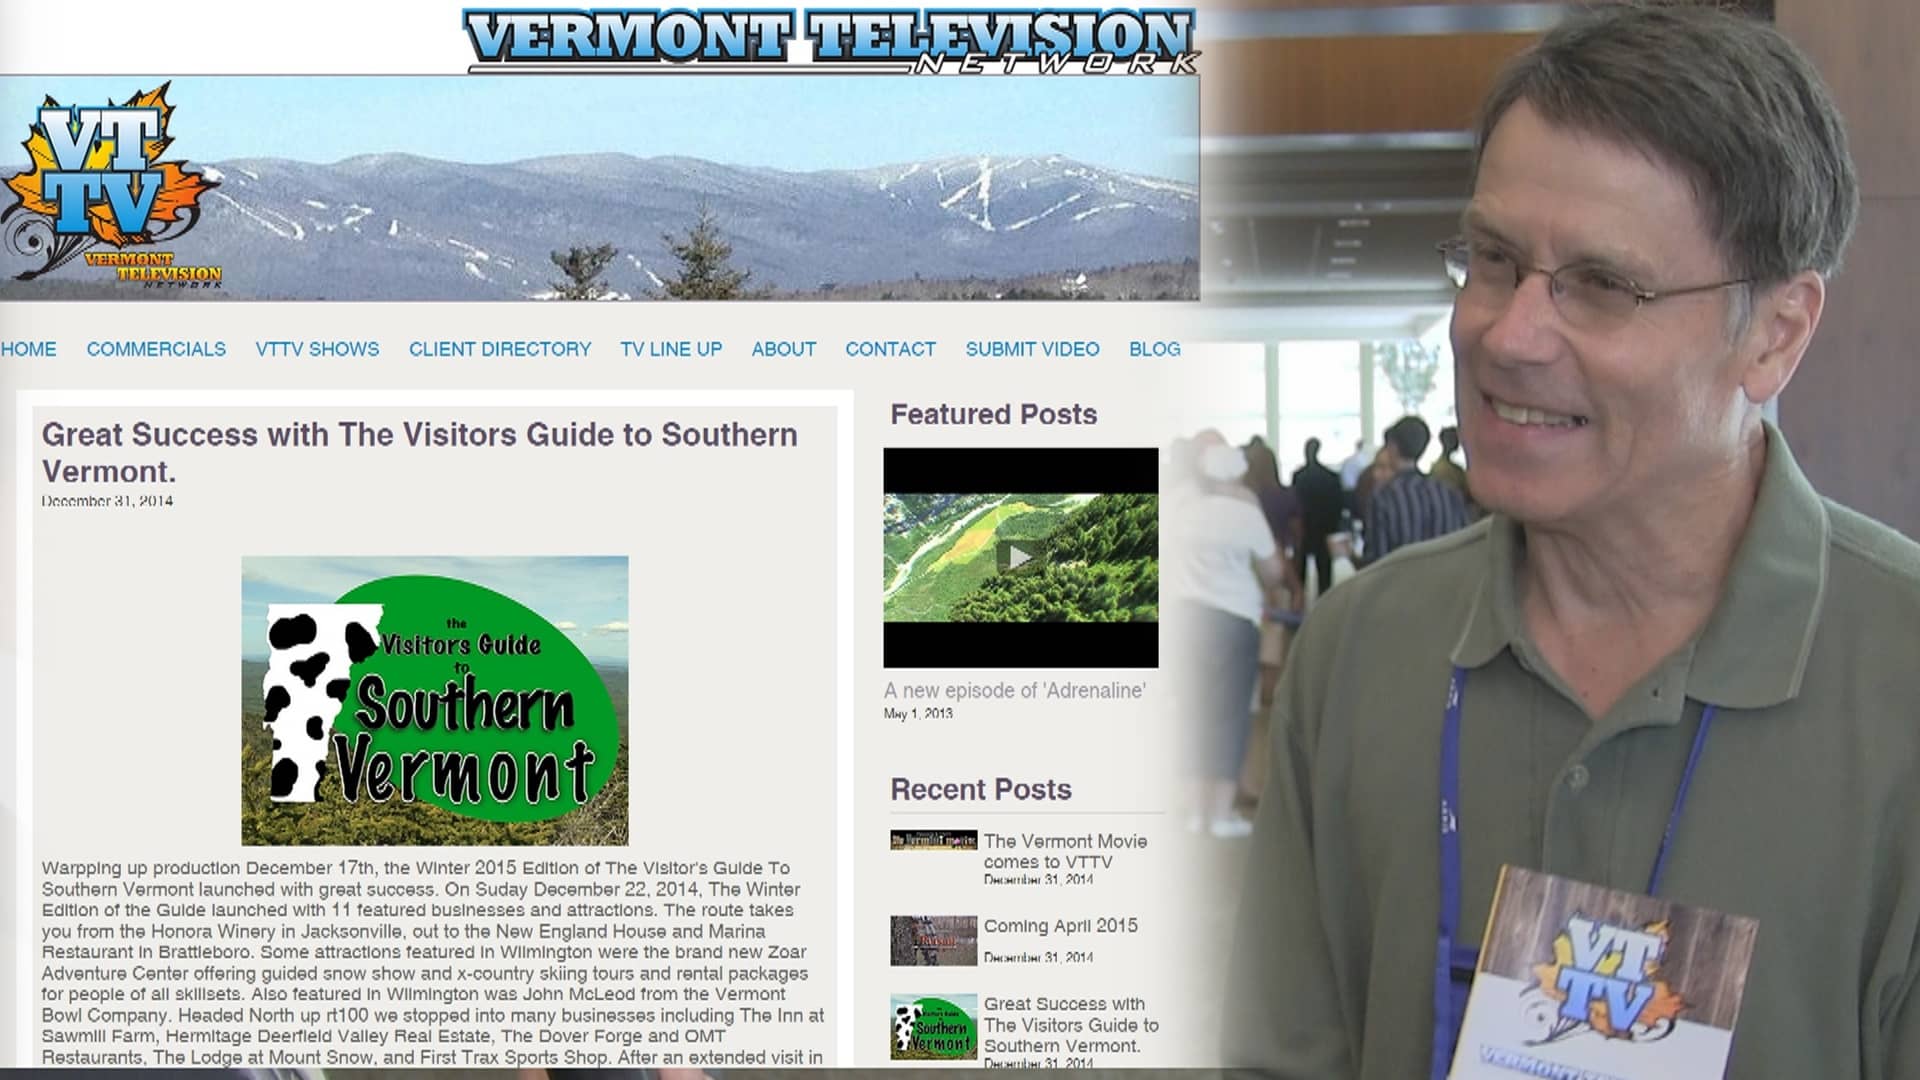 Vermont as a Brand